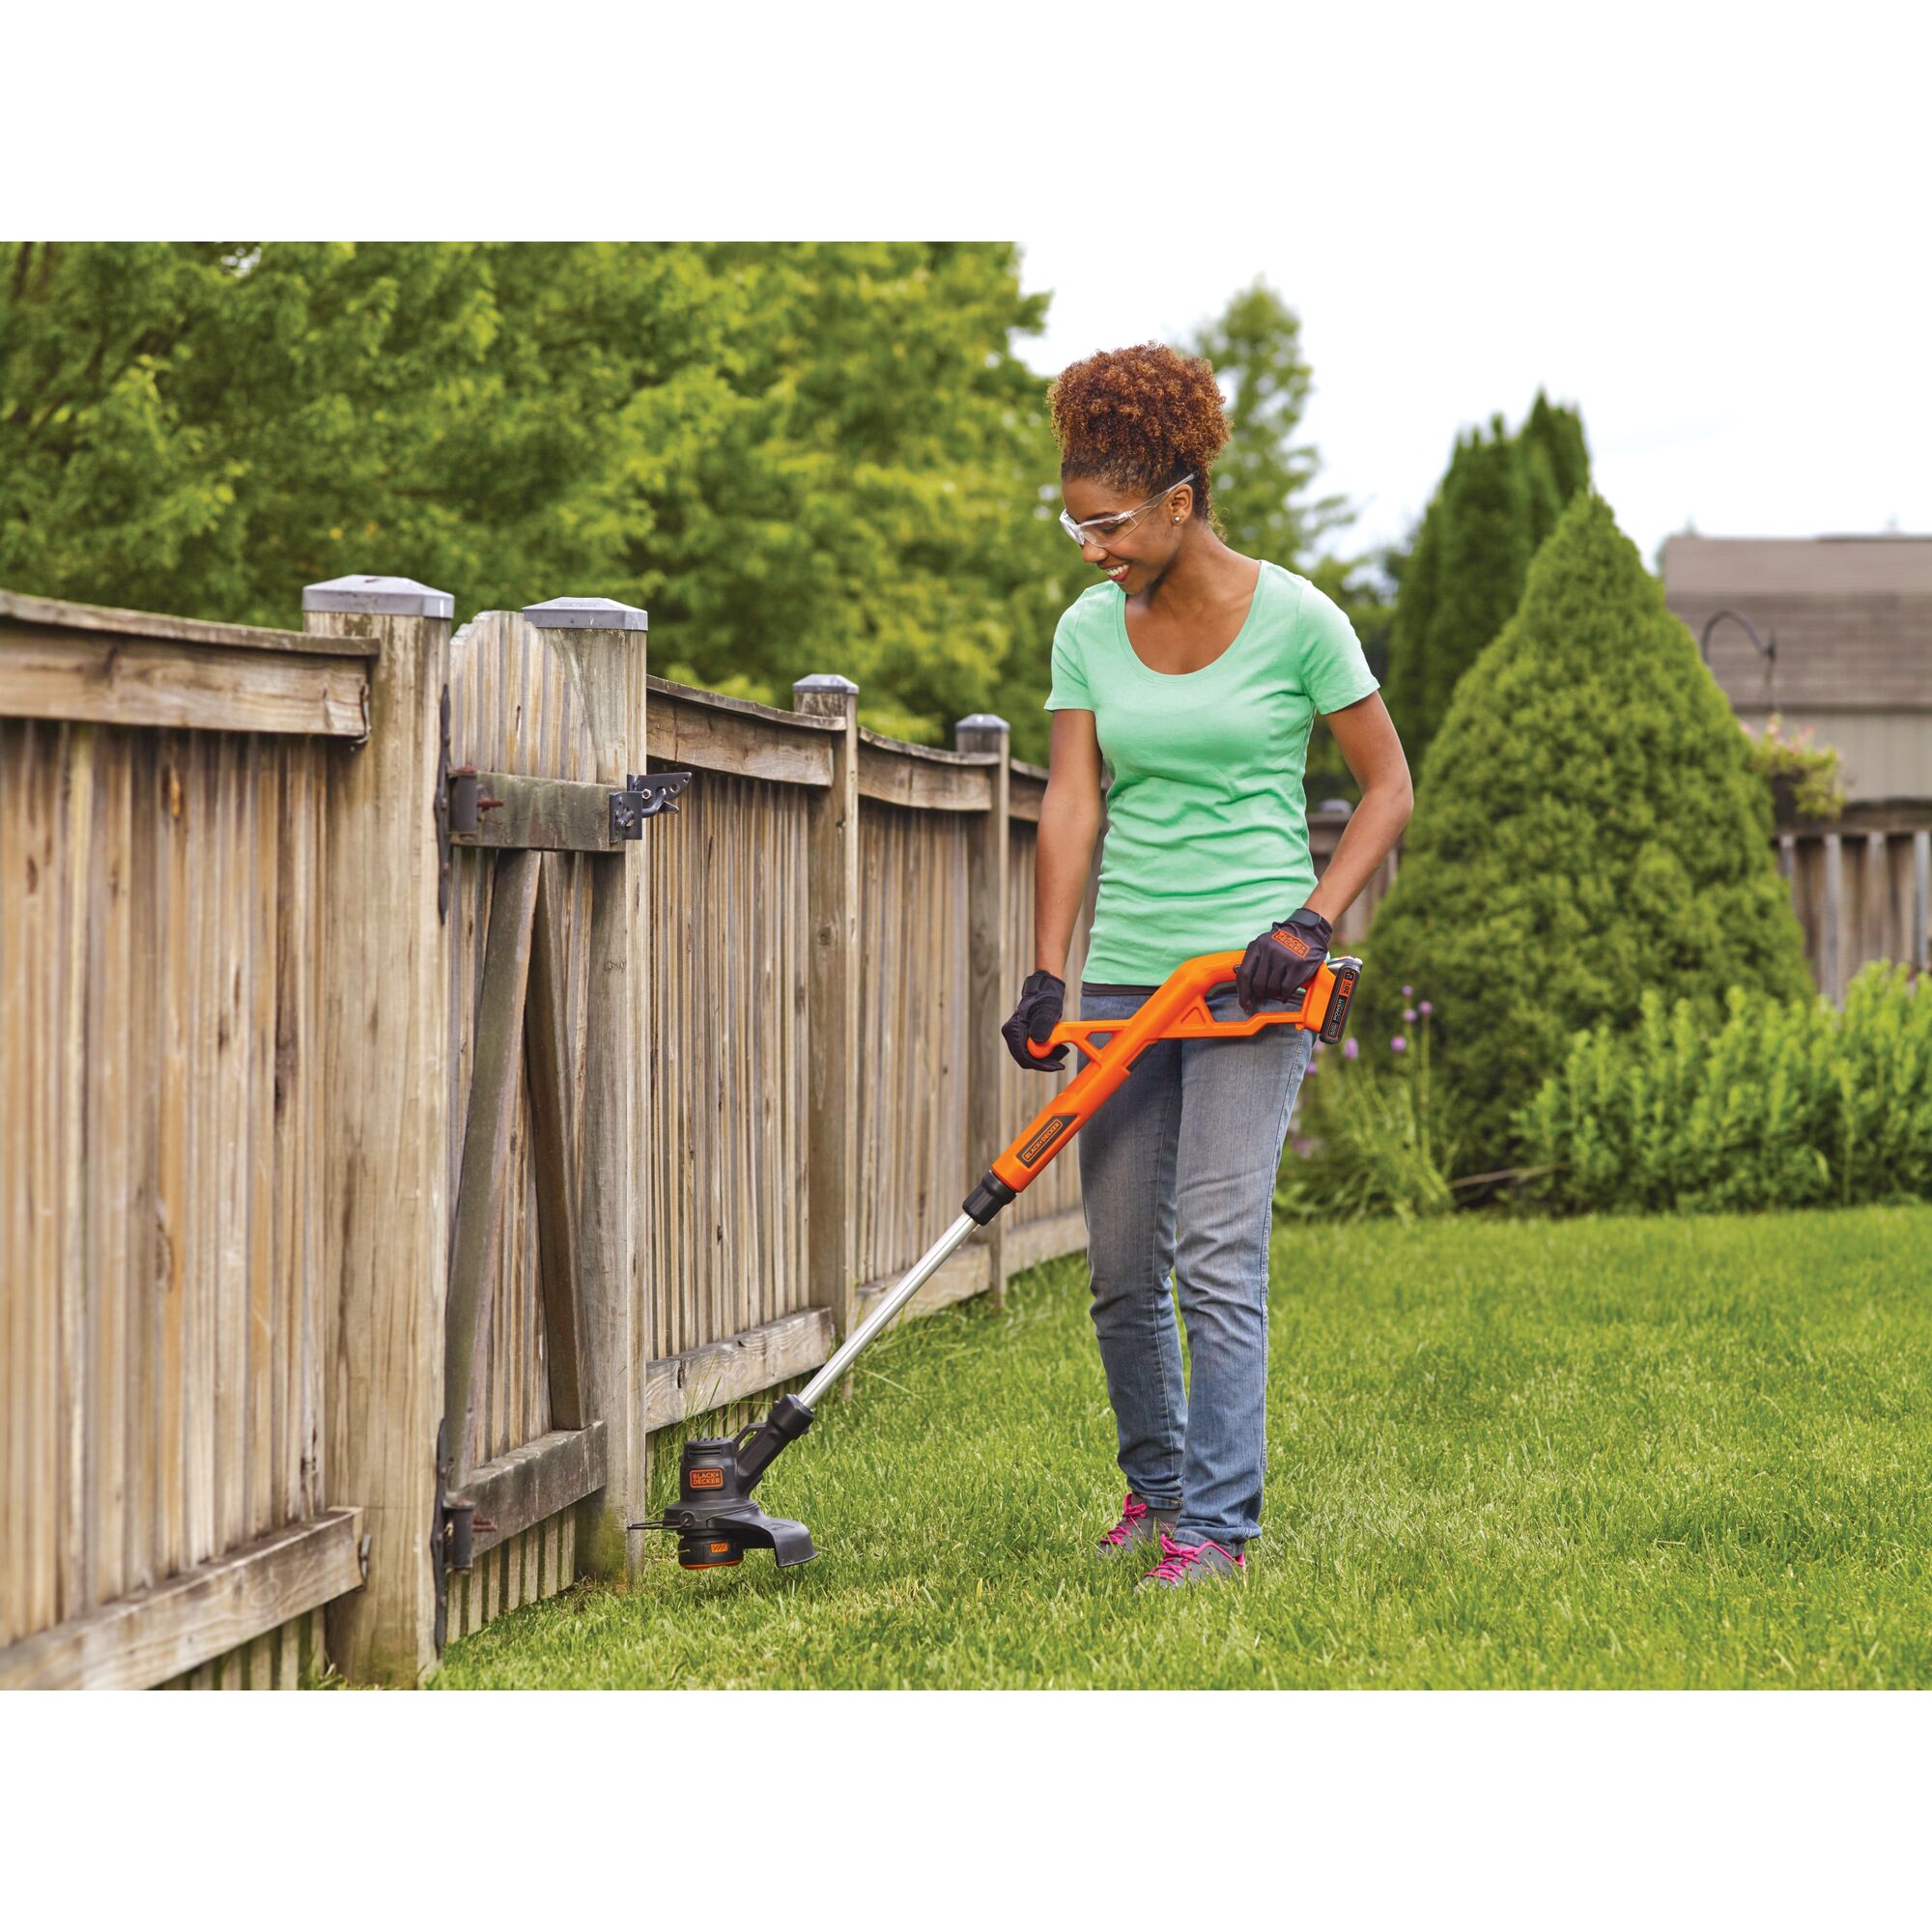 Woman using 20V Max Lithium 10 In. String Trimmer / Edger near a fence.